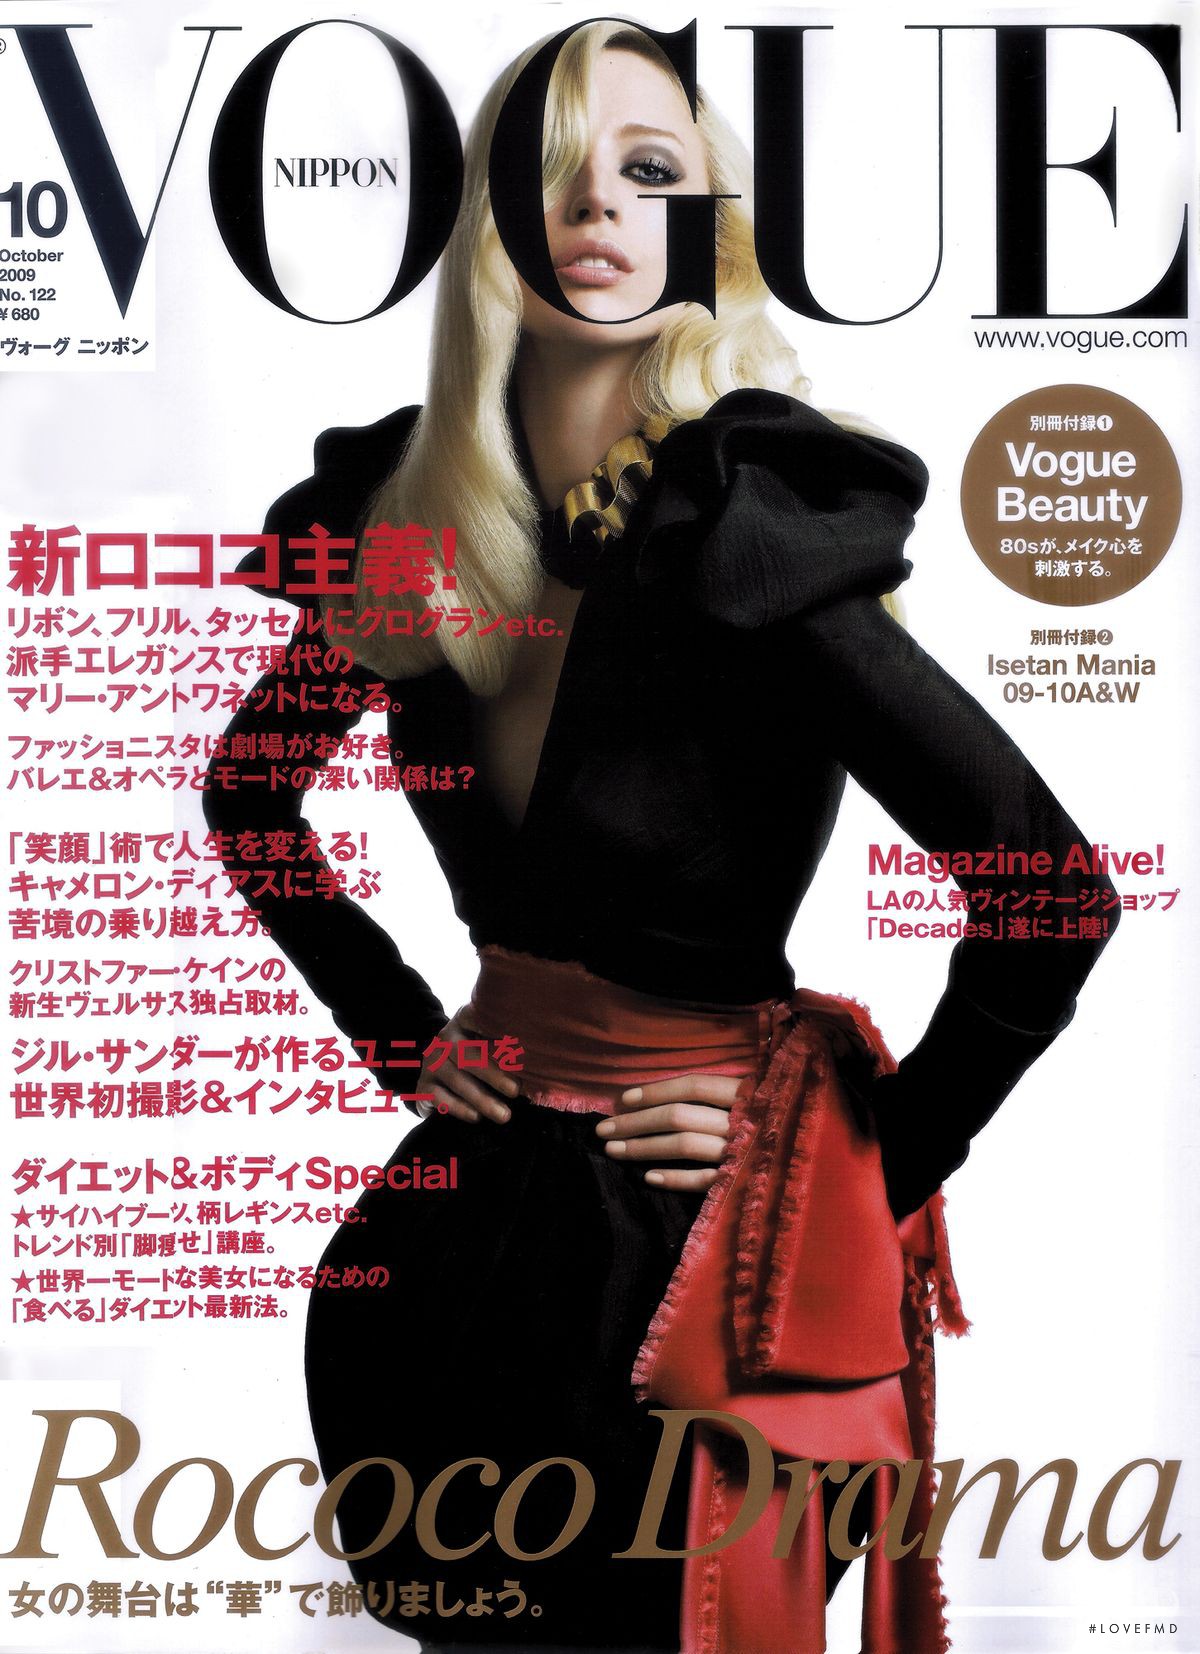 Cover of Vogue Japan with Raquel Zimmermann, October 2009 (ID:3336 ...